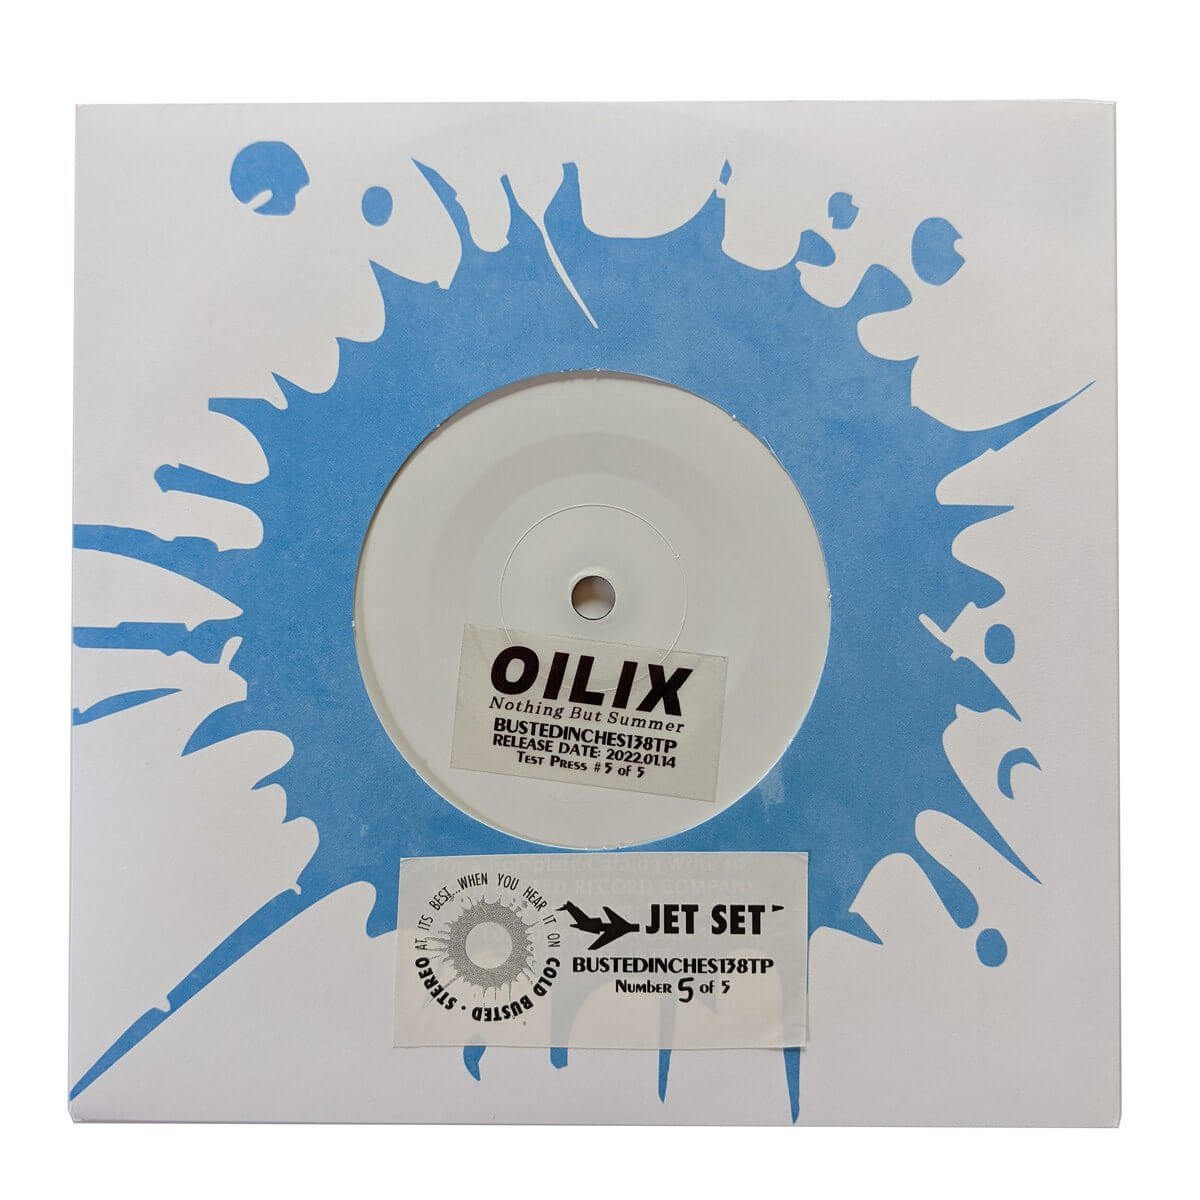 Oilix - Nothing But Summer - Limited Edition 7 Inch Vinyl Test Pressing - Cold Busted